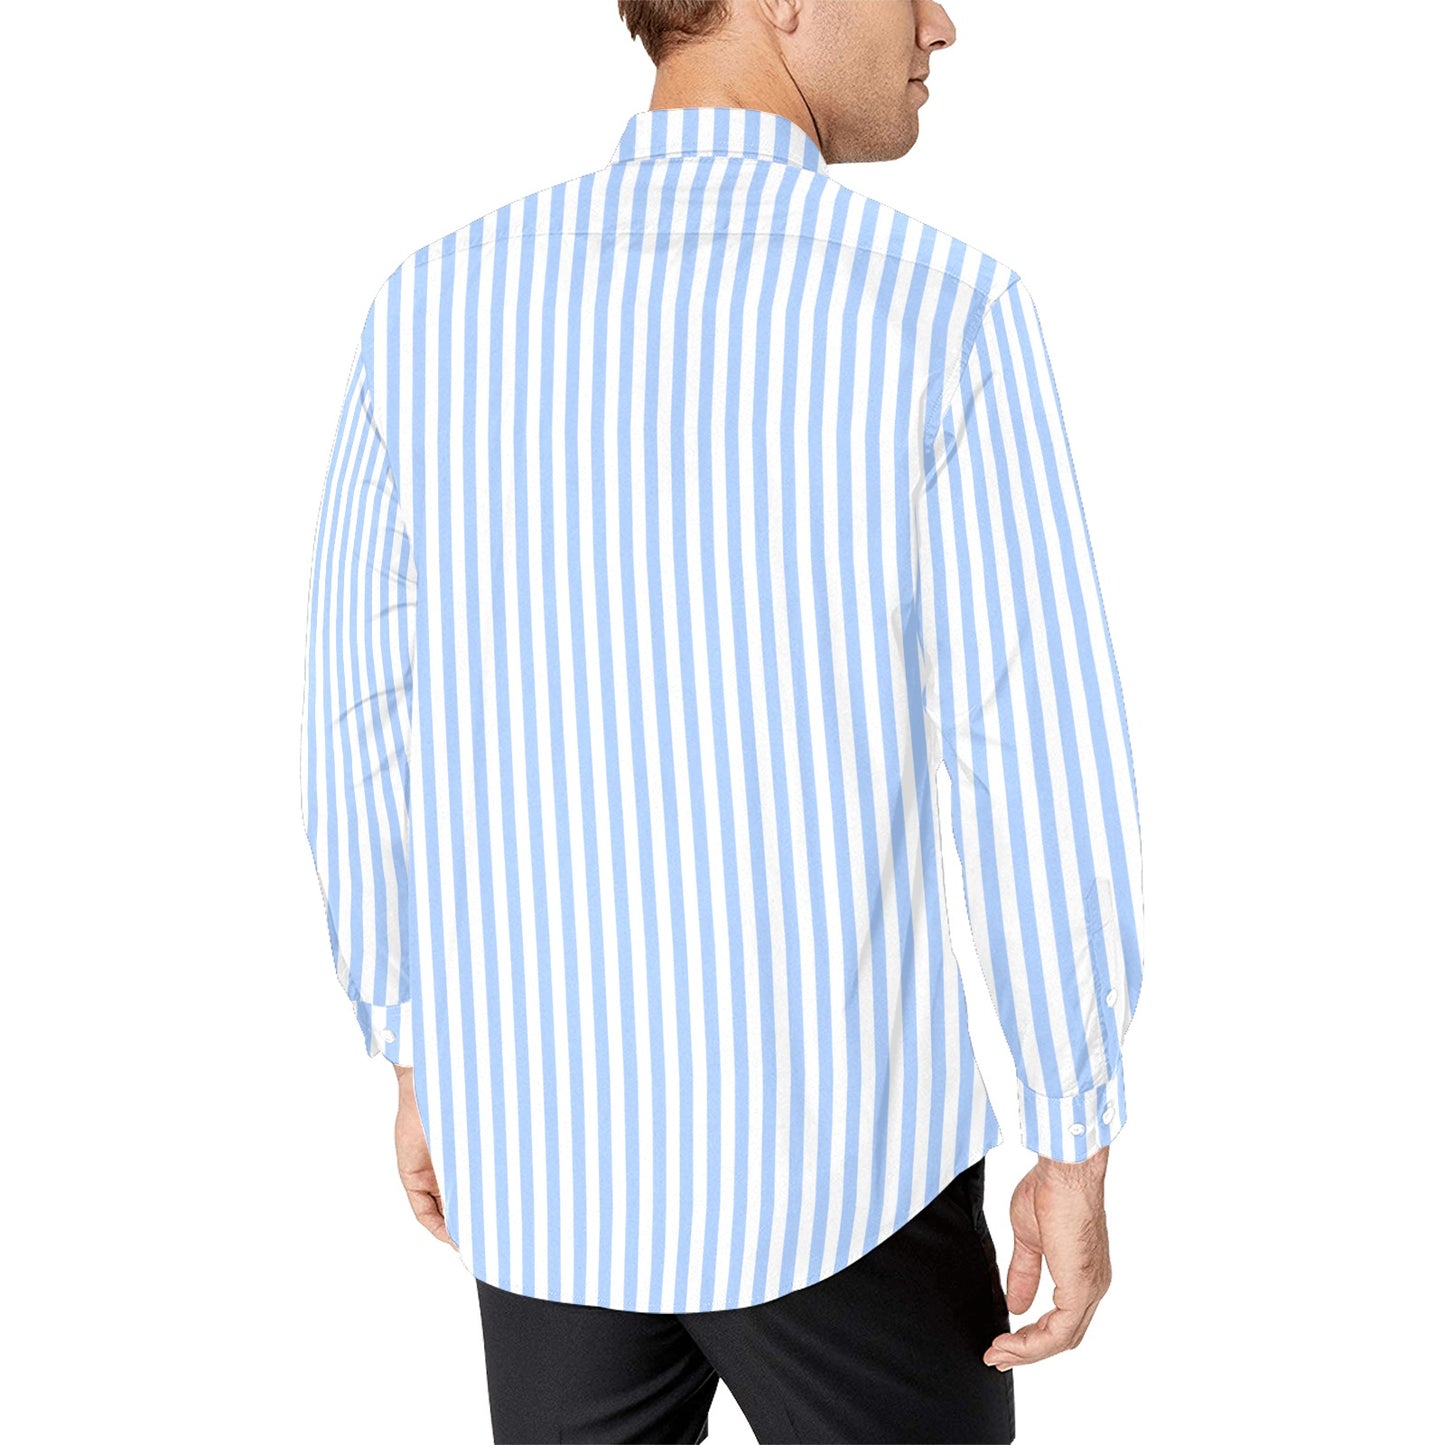 Light Blue Striped Long Sleeve Men Button Up Shirt, White Print Buttoned Collared Dress Shirt with Chest Pocket Starcove Fashion